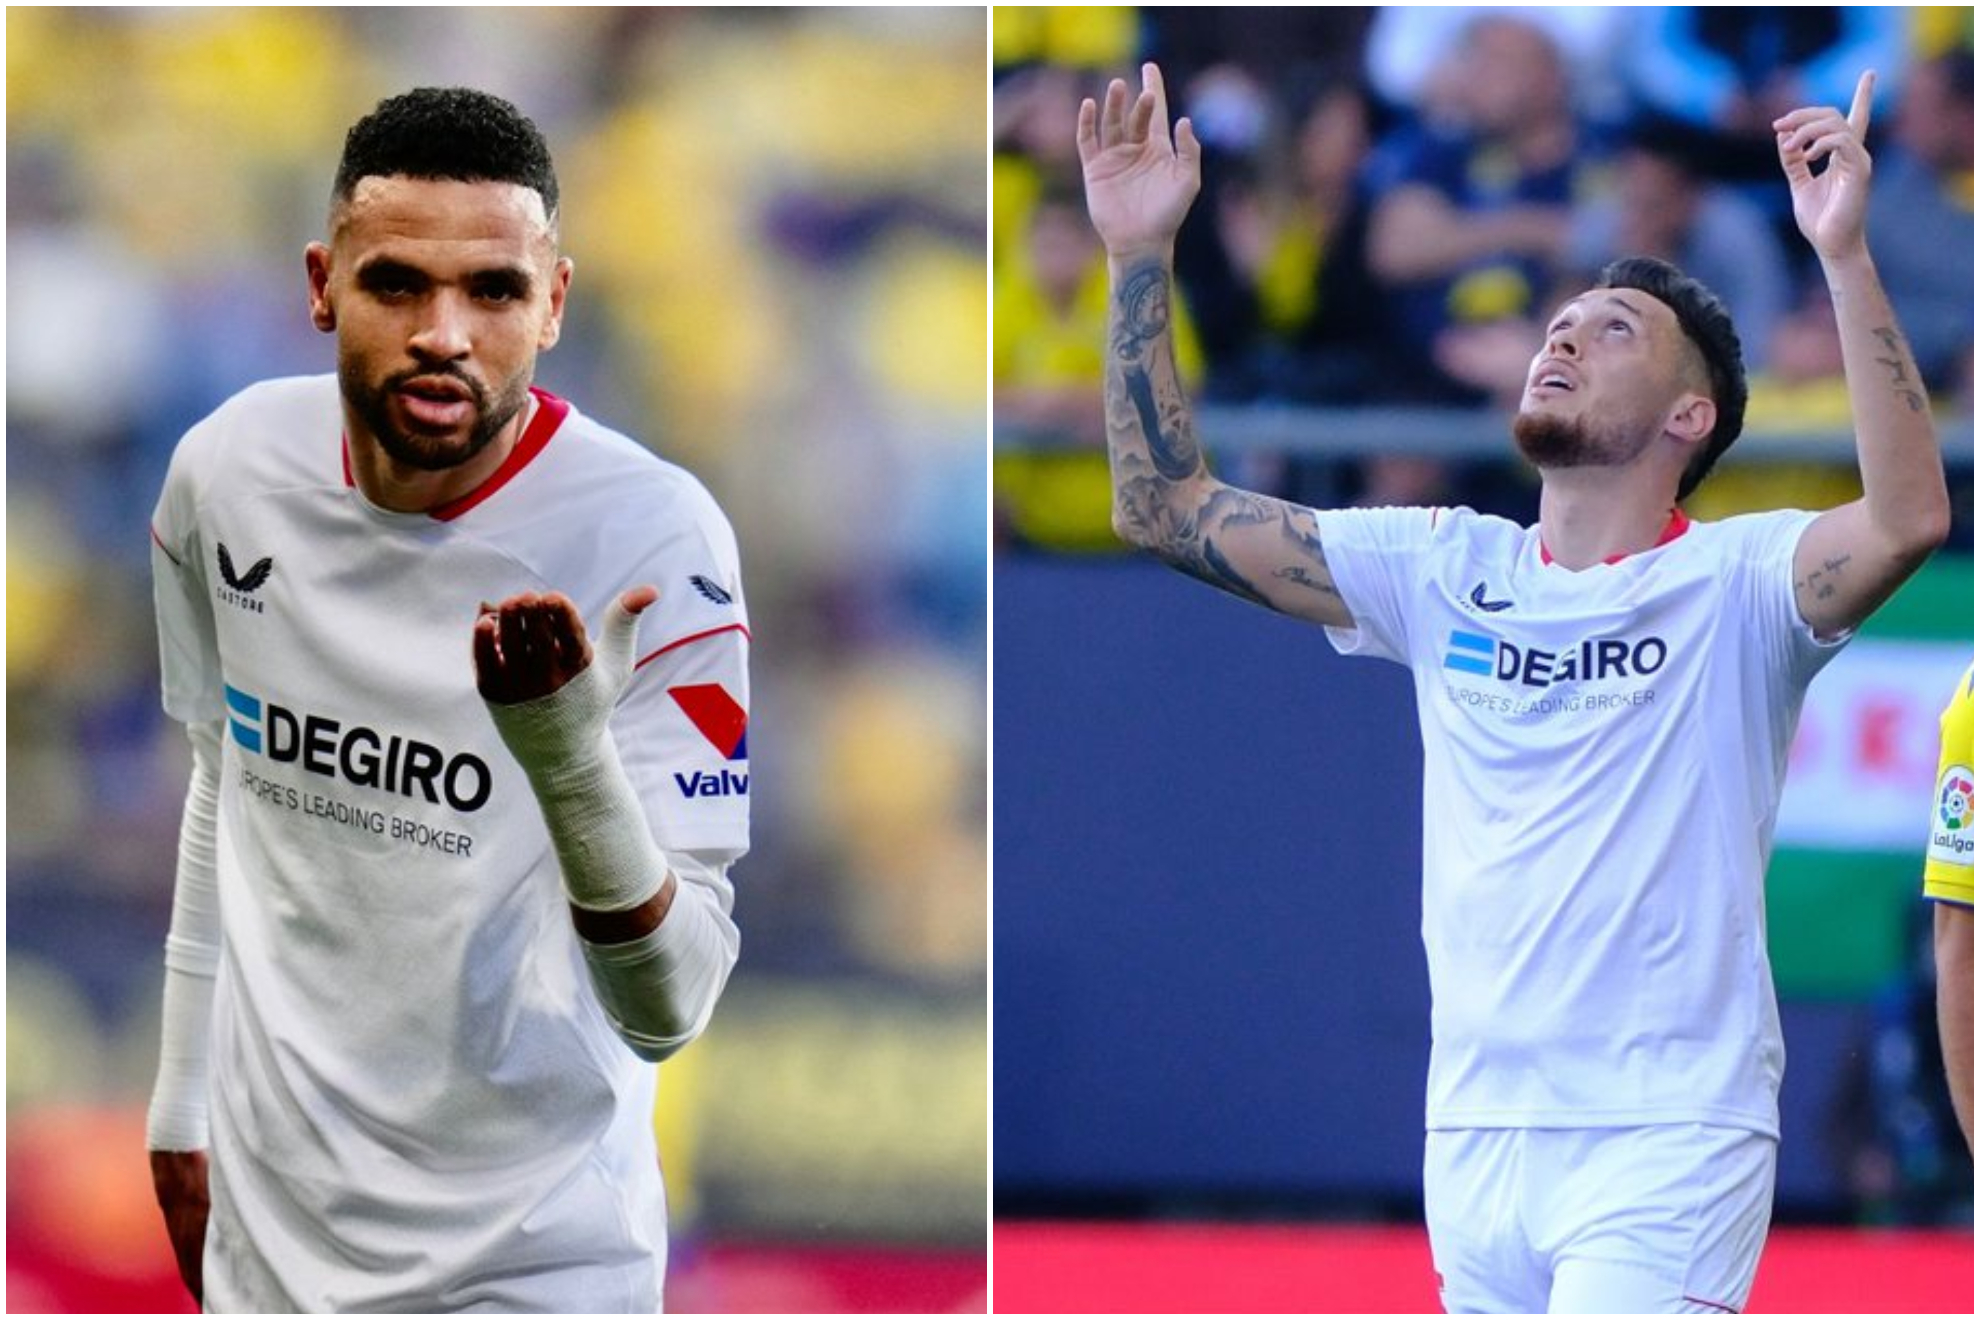 Ocampos or En-Nesyri? Only one can be Decisive Player of the Matchday